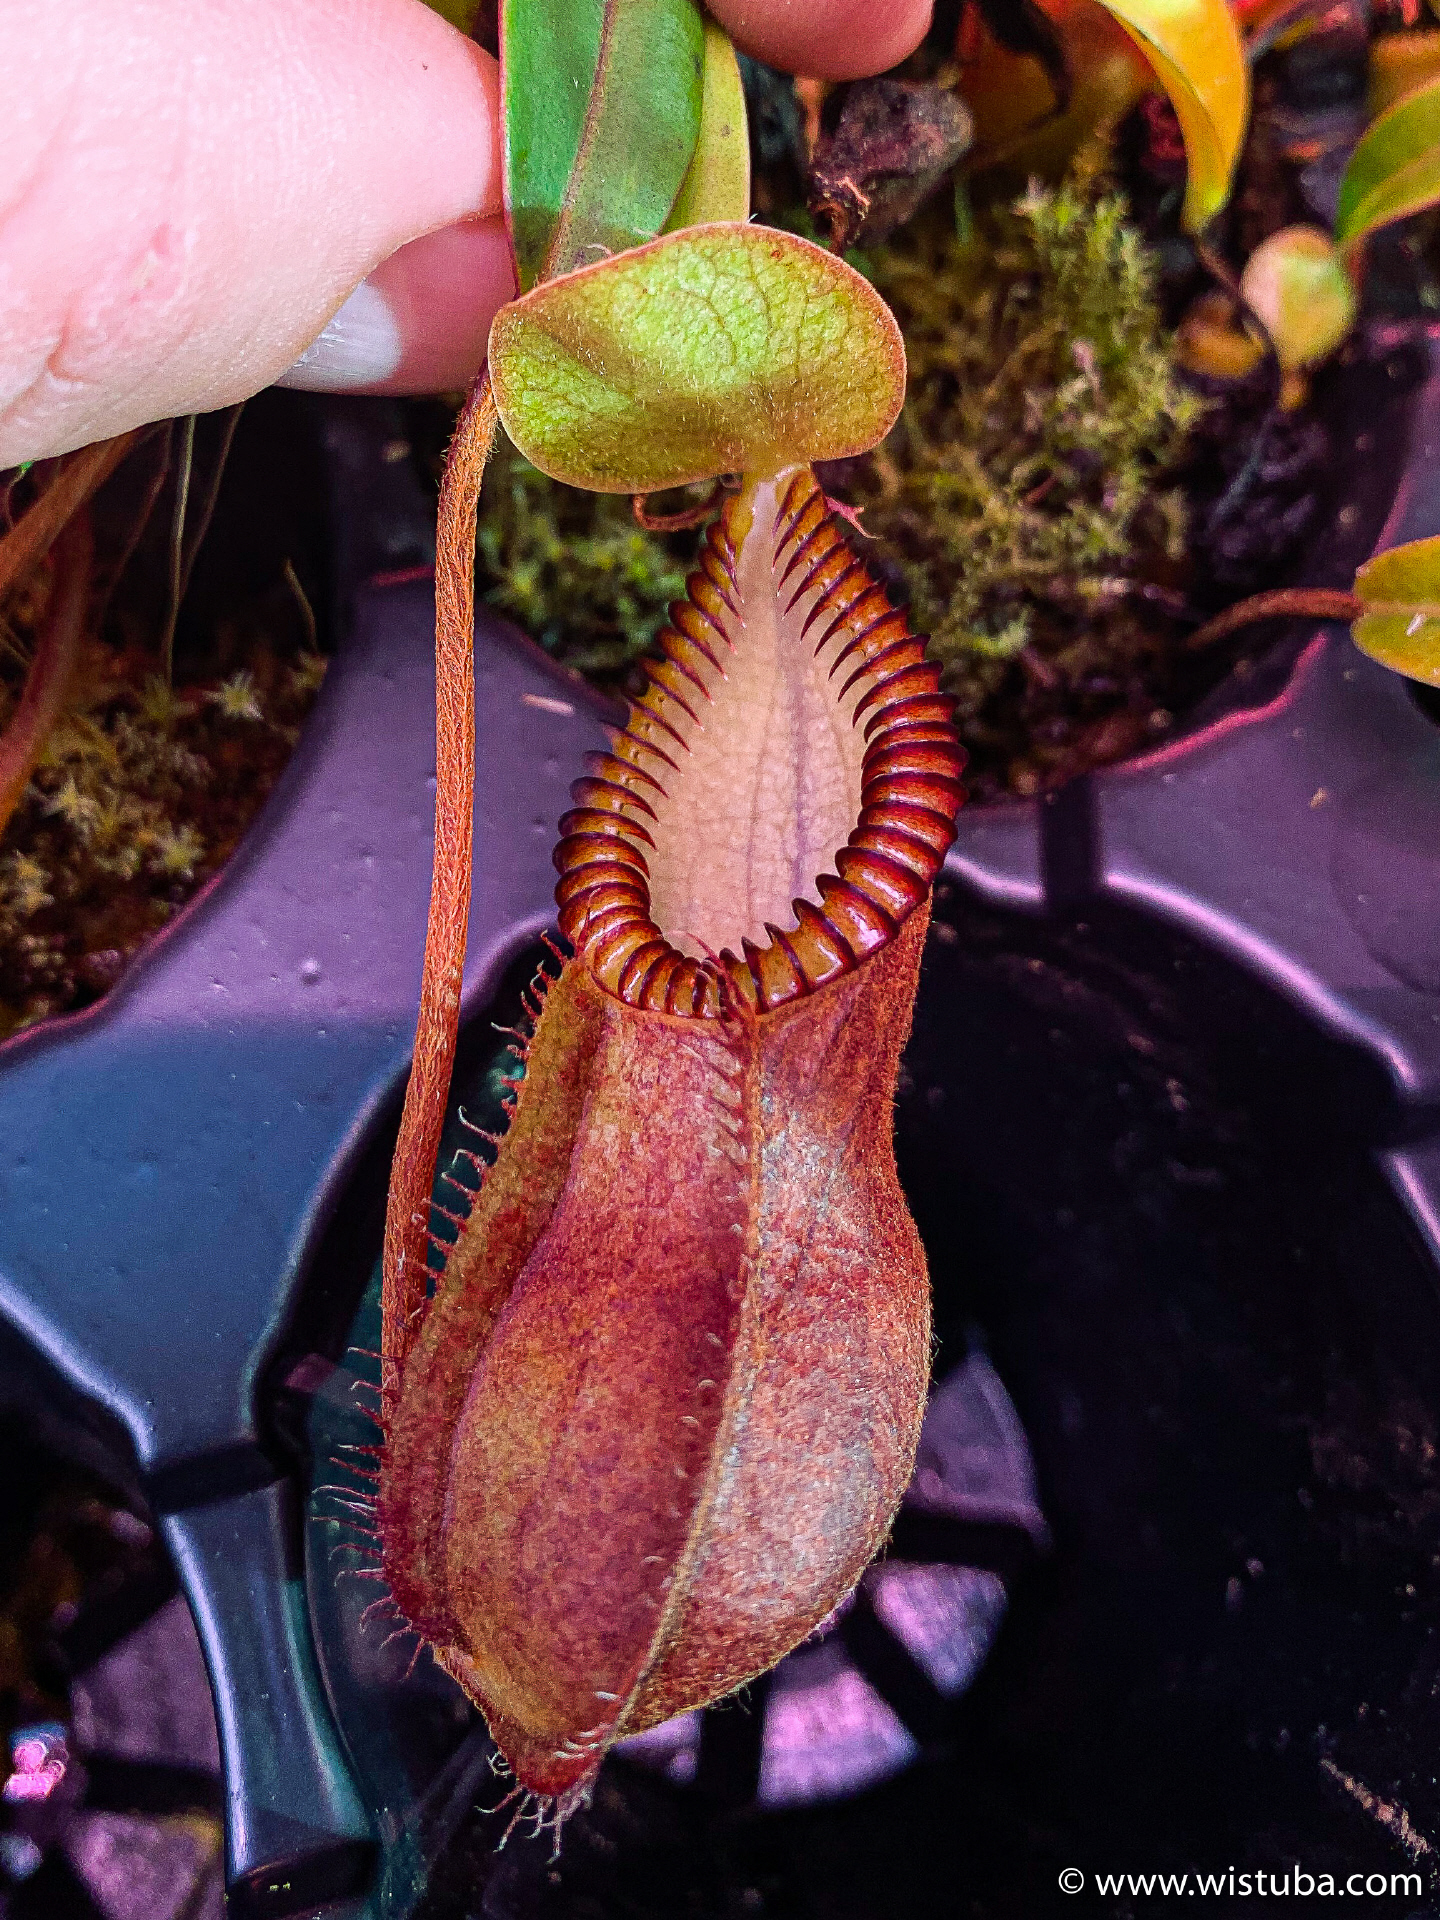 Nepenthes diabolica (="Red Hairy Hamata" = "RHH")